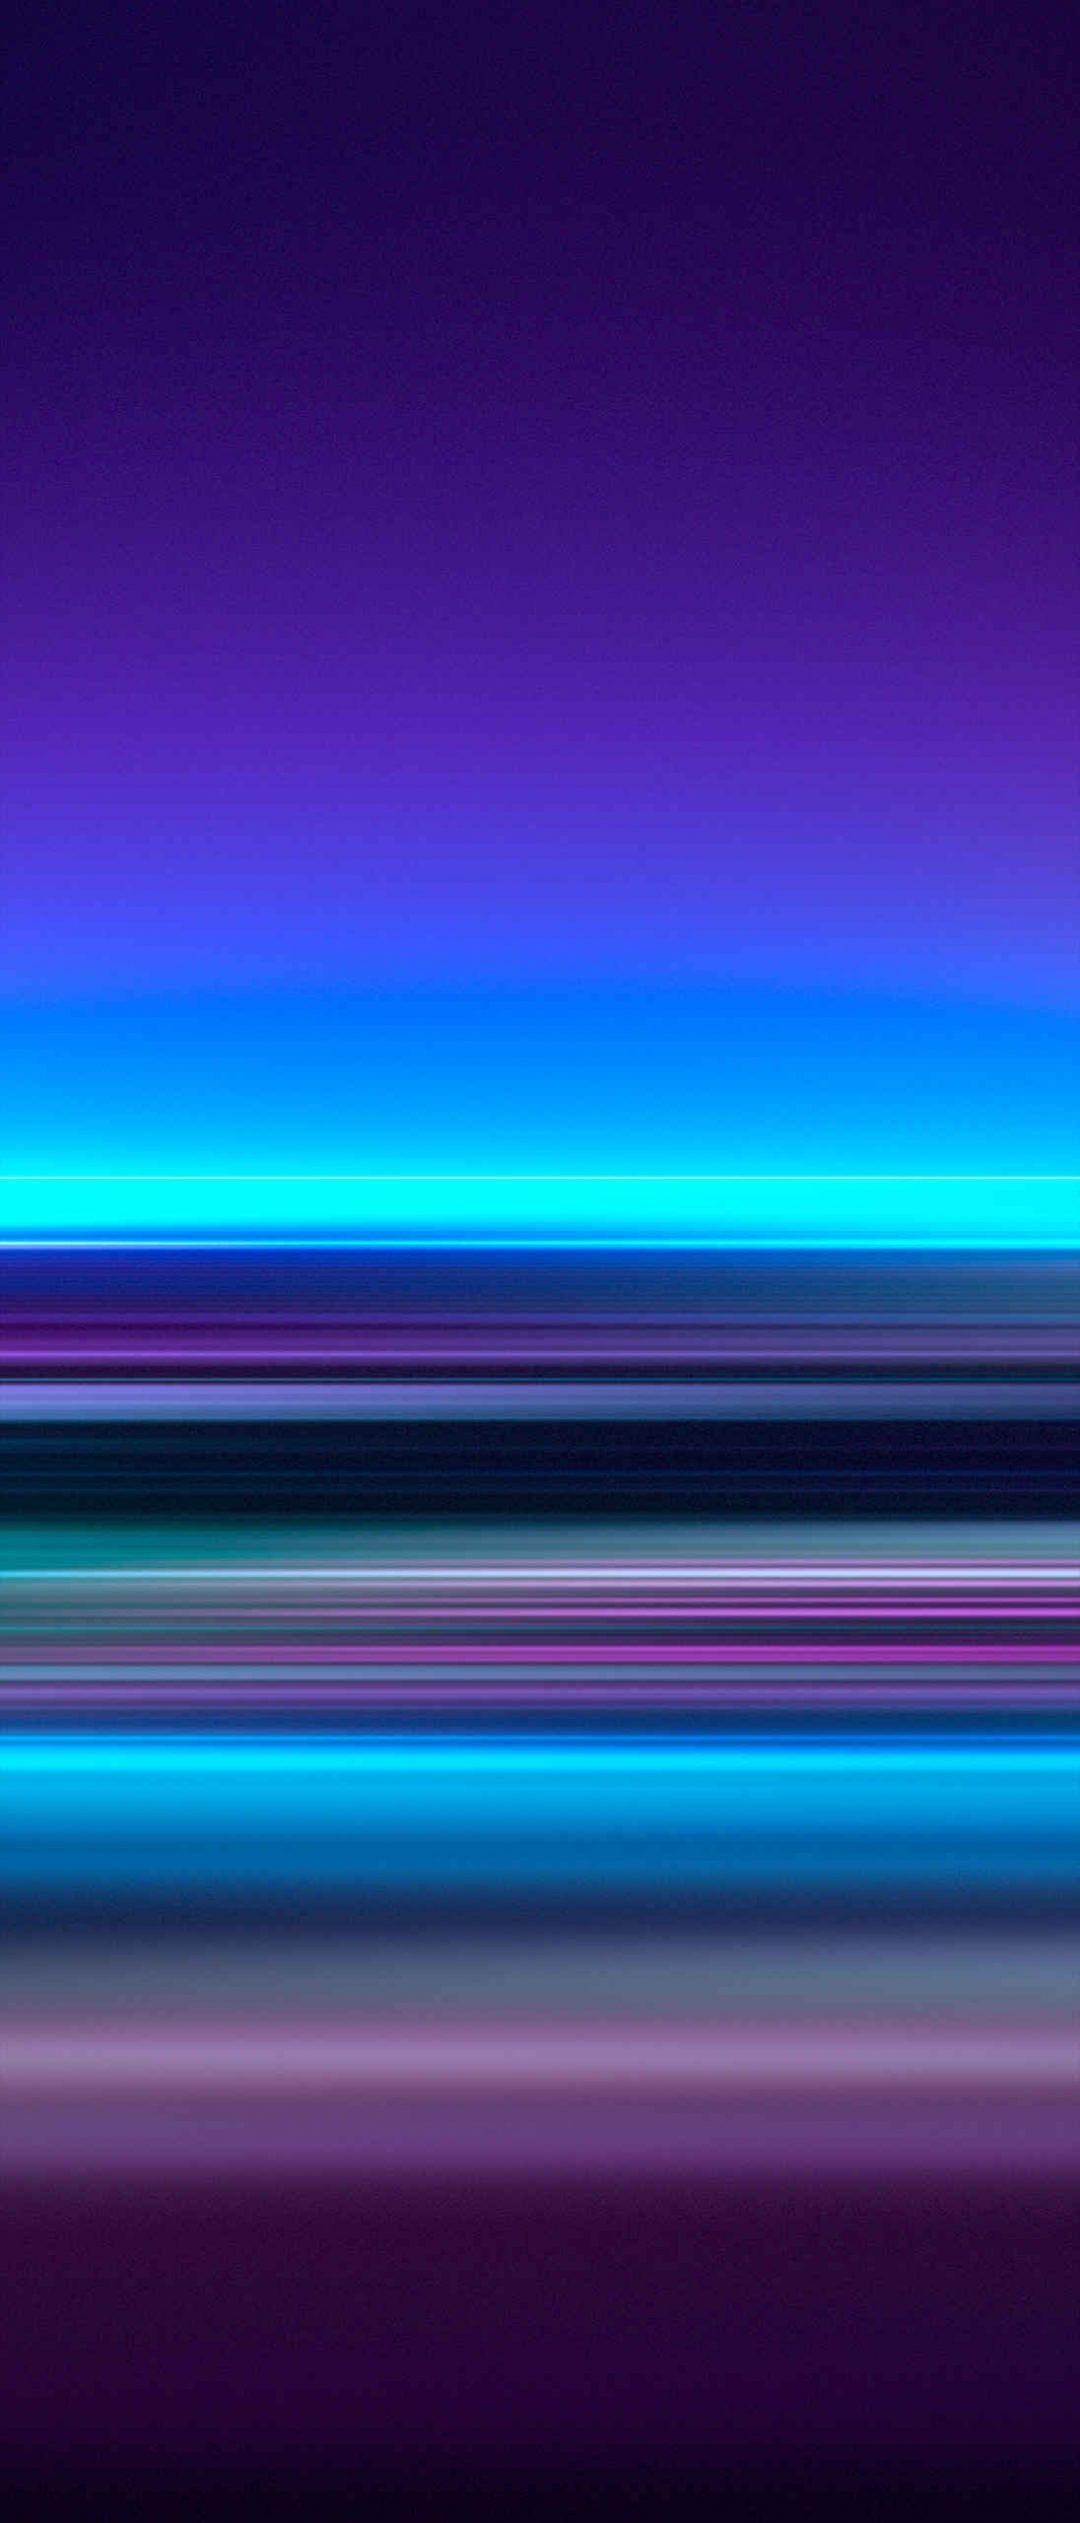 Sony Xperia 1 Wallpapers - Top Free Sony Xperia 1 Backgrounds